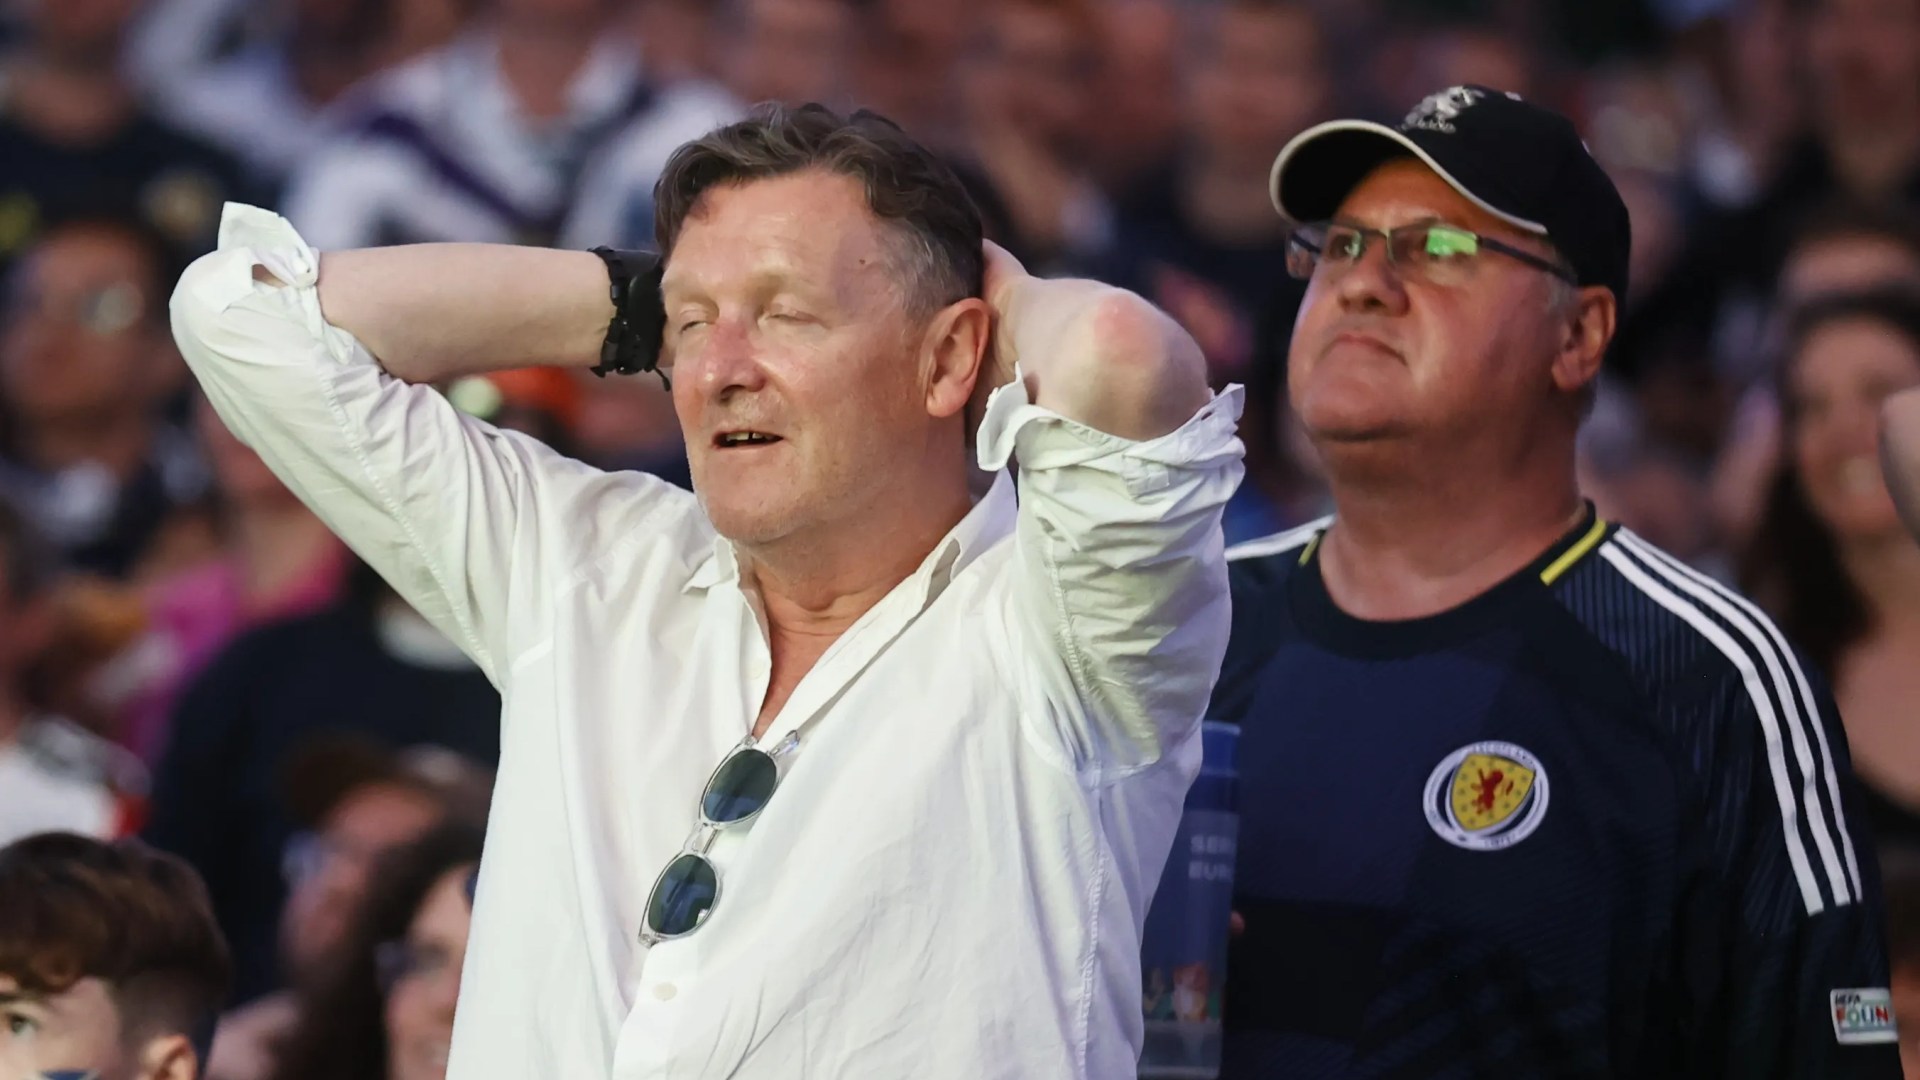 Scotland's Devastating Half: Fans Leave Allianz Arena in Disappointment